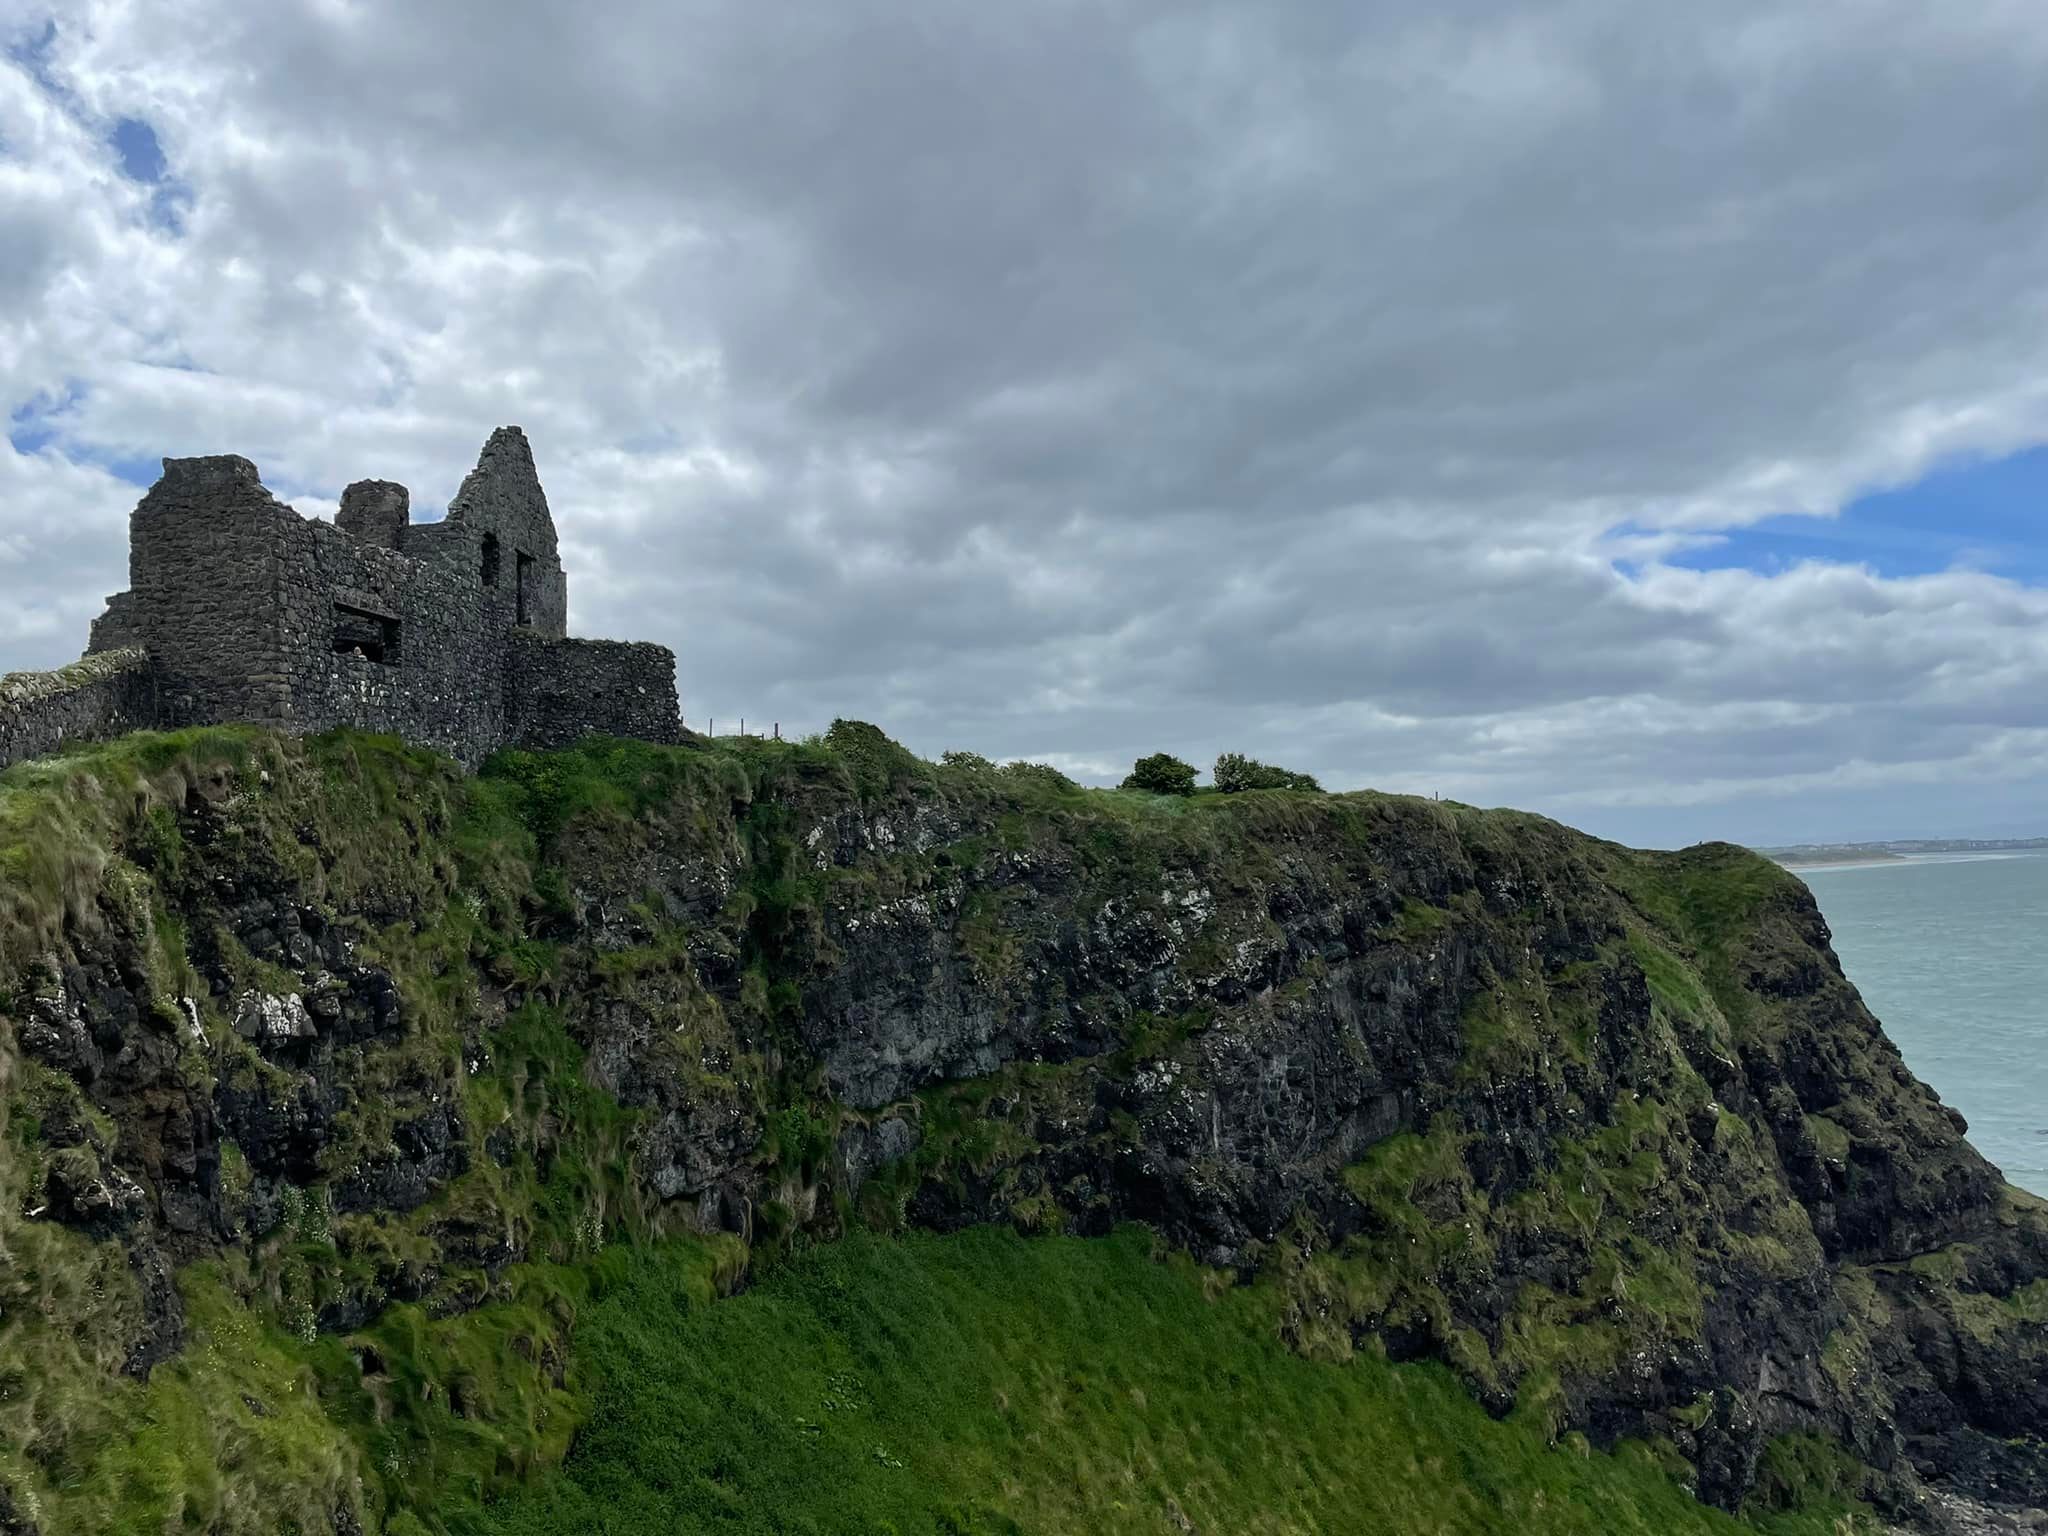 Distant shot of a large, abandoned stone castle on a high cliff during a stormy day